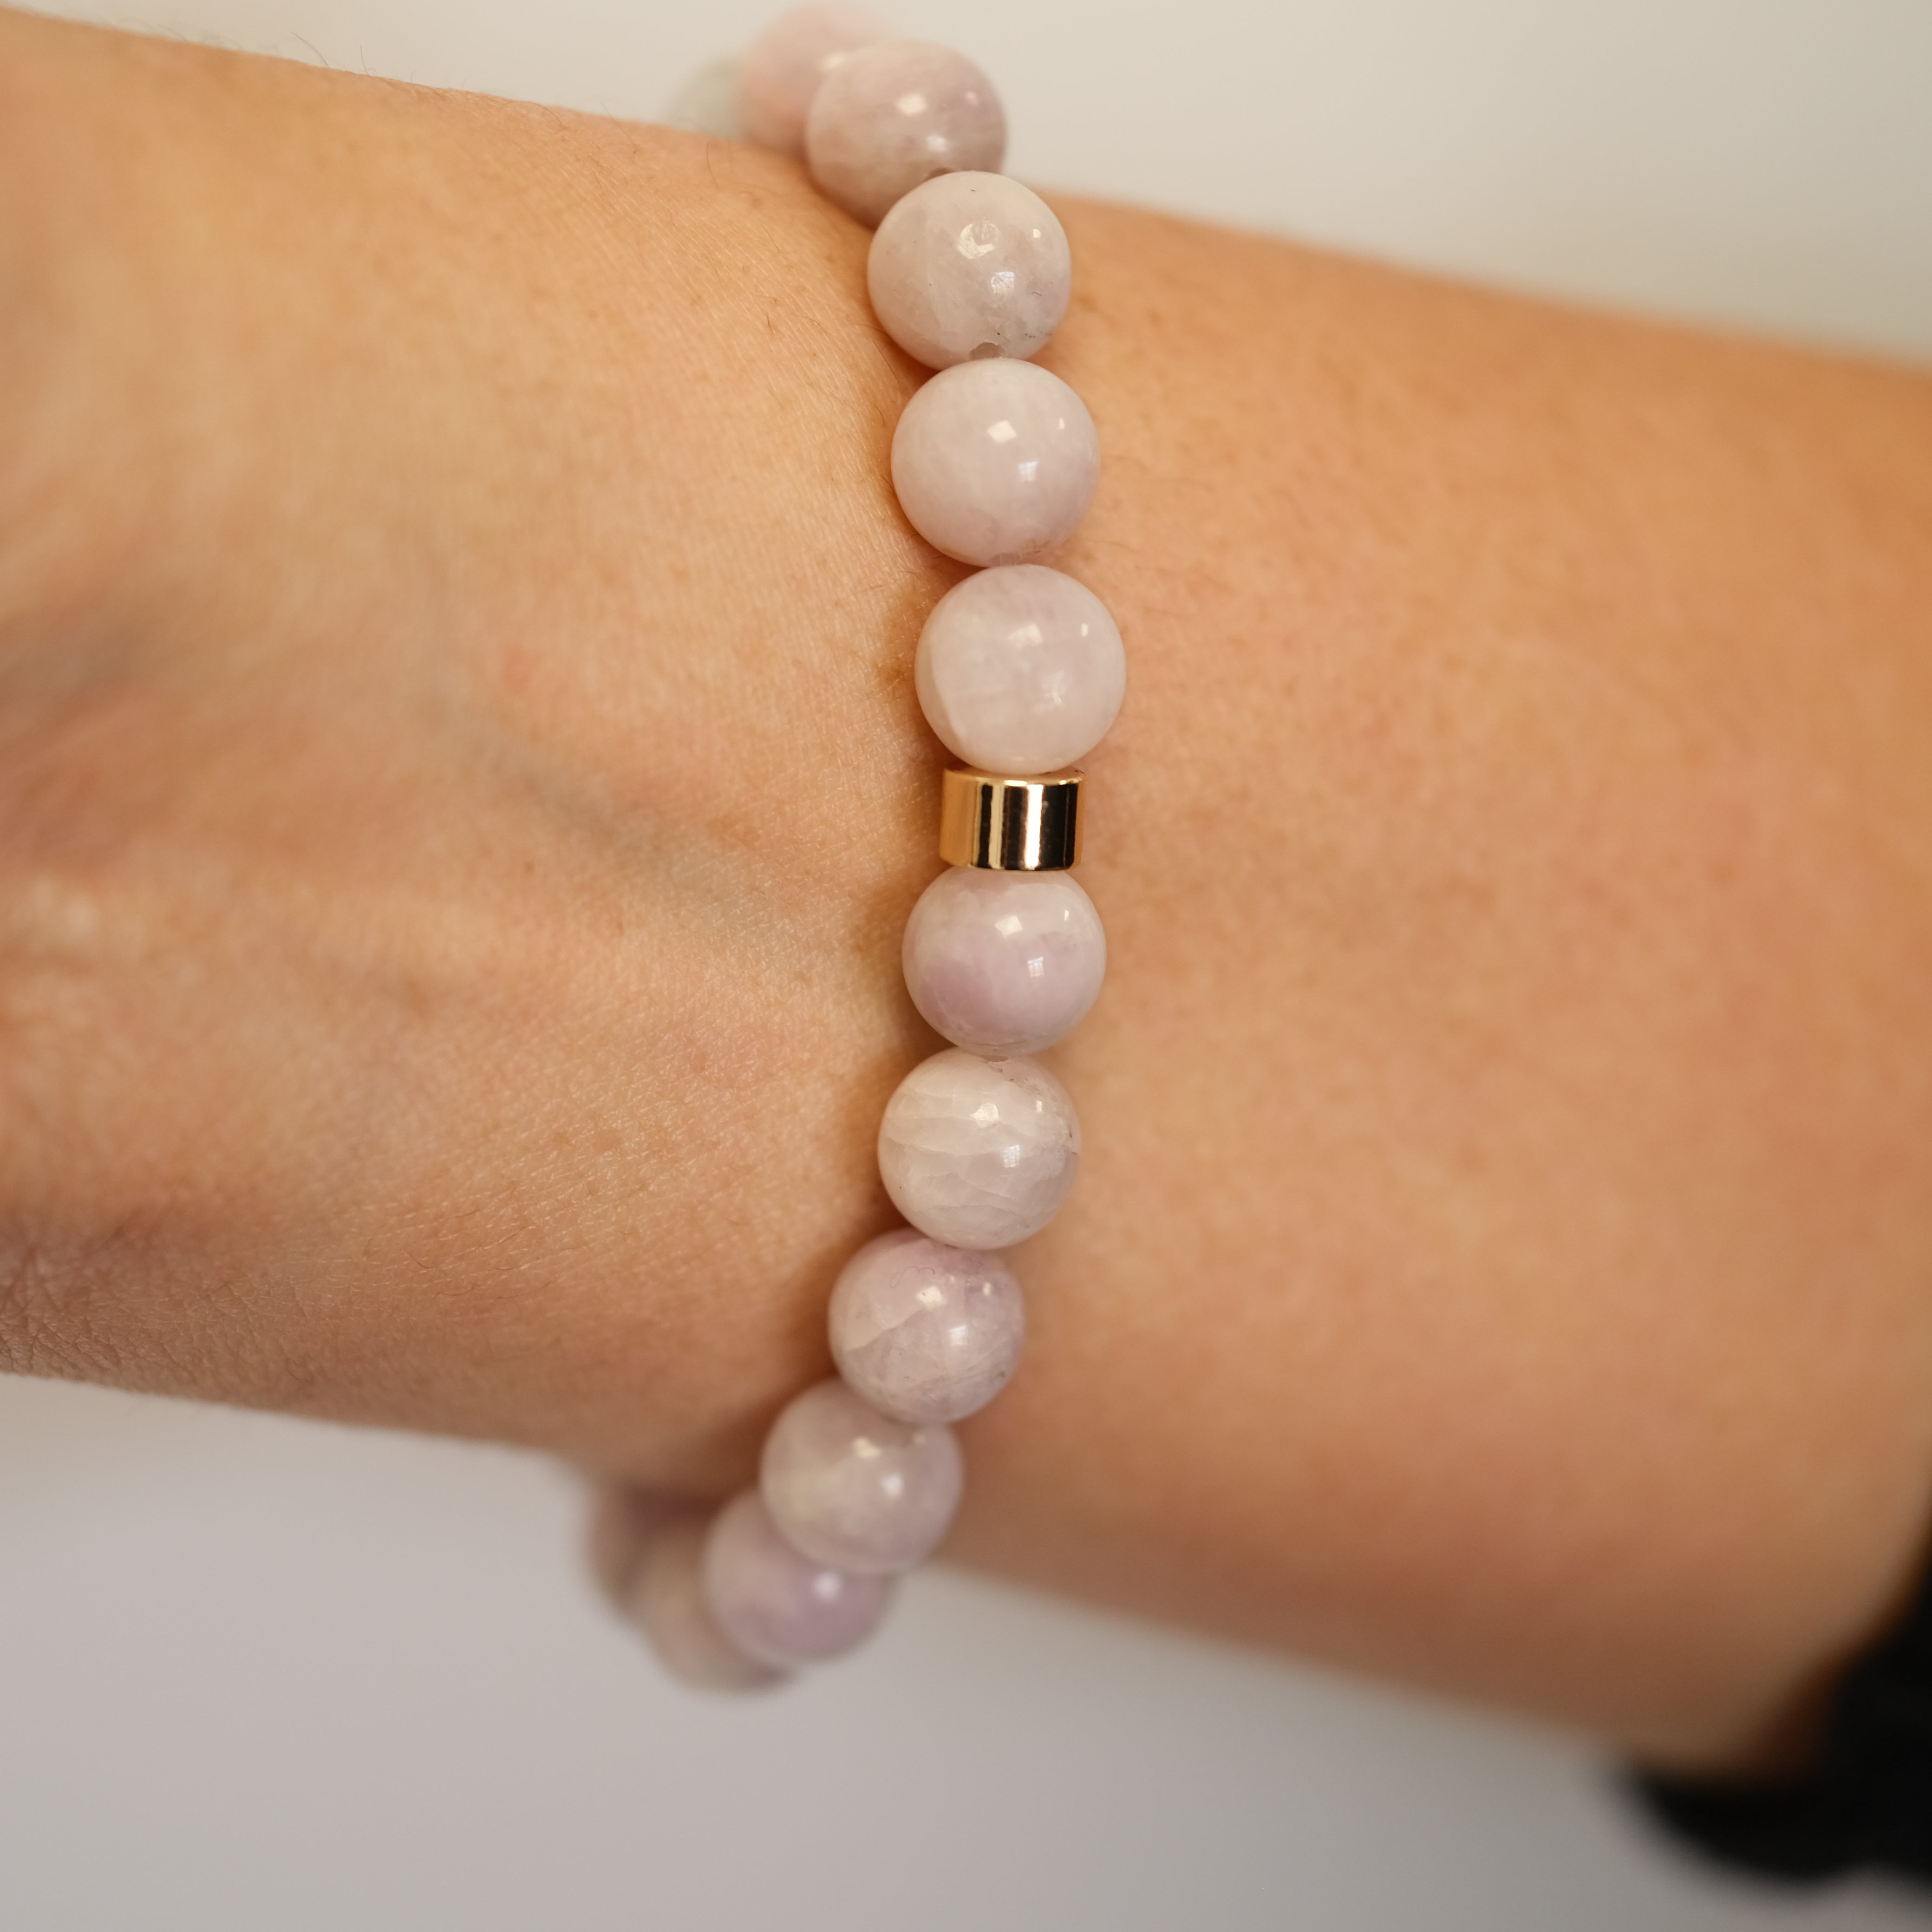 A Kunzite gemstone bracelet with gold accessories worn on a model's wrist from the back